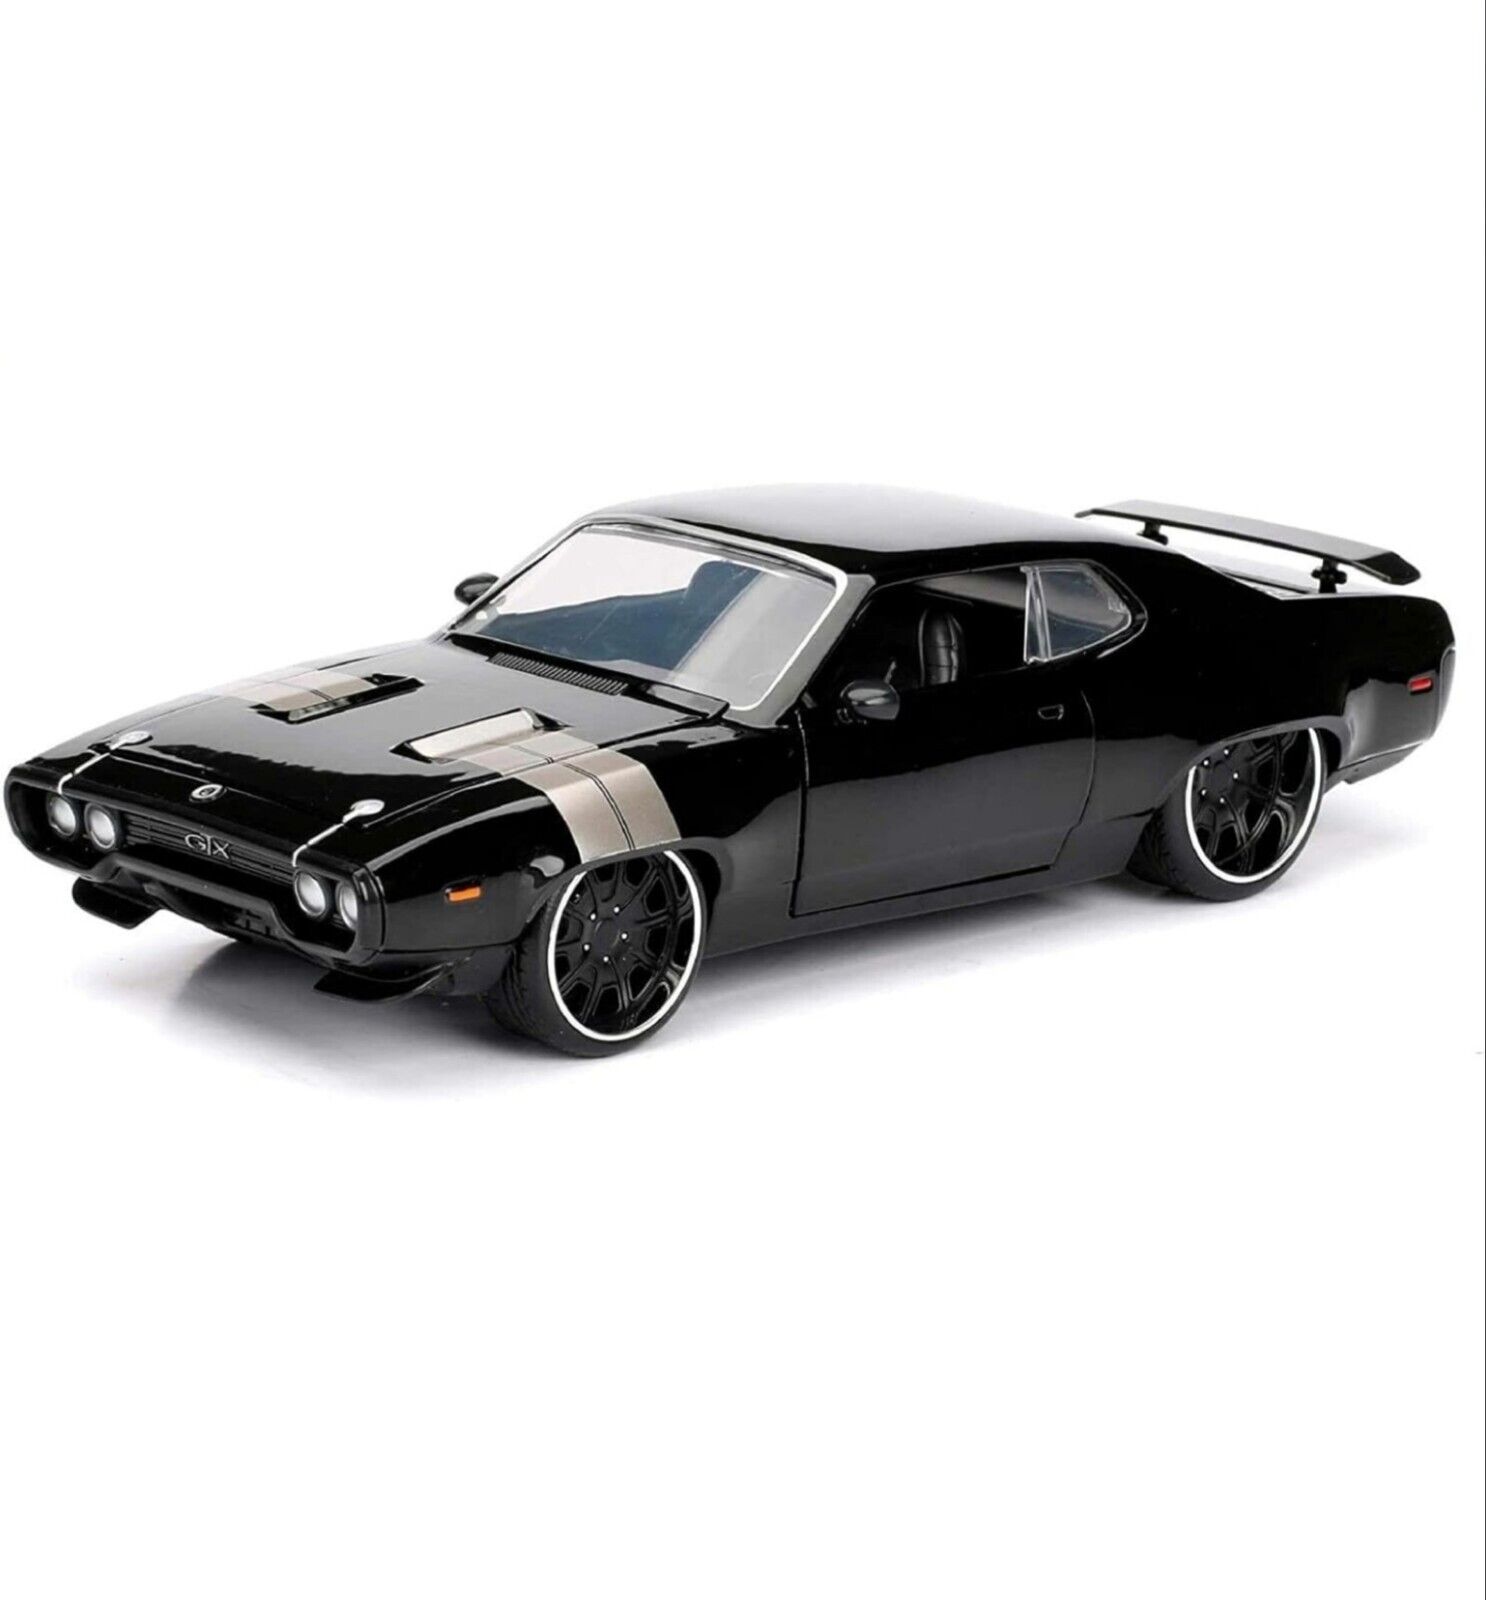 NEW JADA DIECAST FAST AND FURIOUS DOM\'S PLYMOUTH GTX BLACK 1:24 SCALE